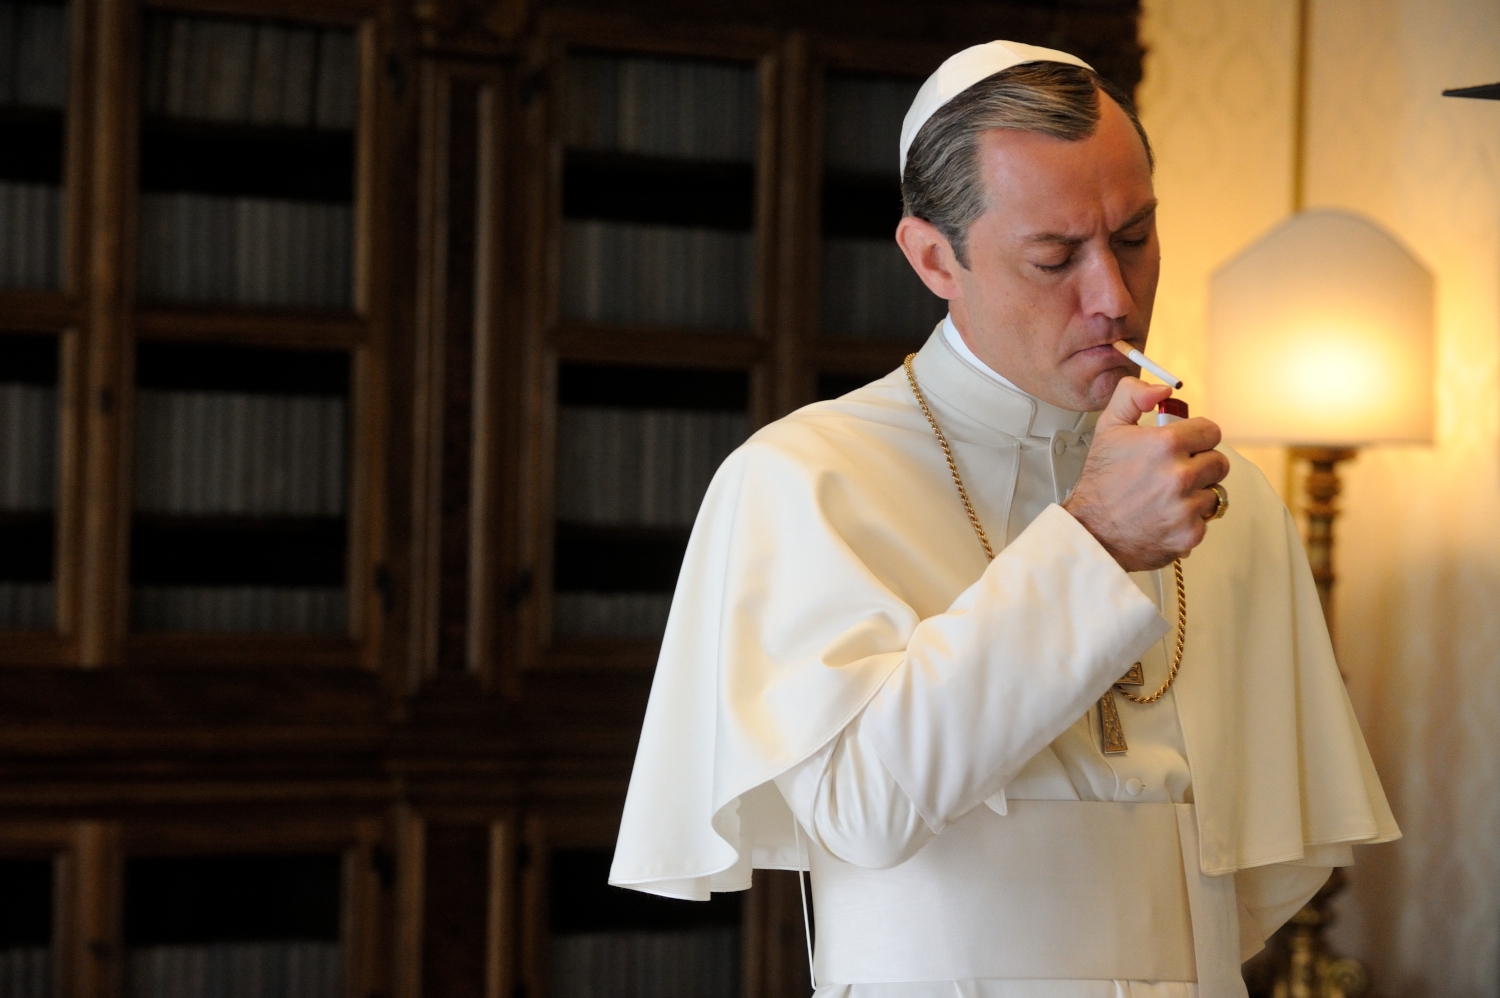 set of "The young Pope" by Paolo Sorrentino. 24/11/2015 sc.318 ep. 3 In the picture Jude Law. Photo by Gianni Fiorito